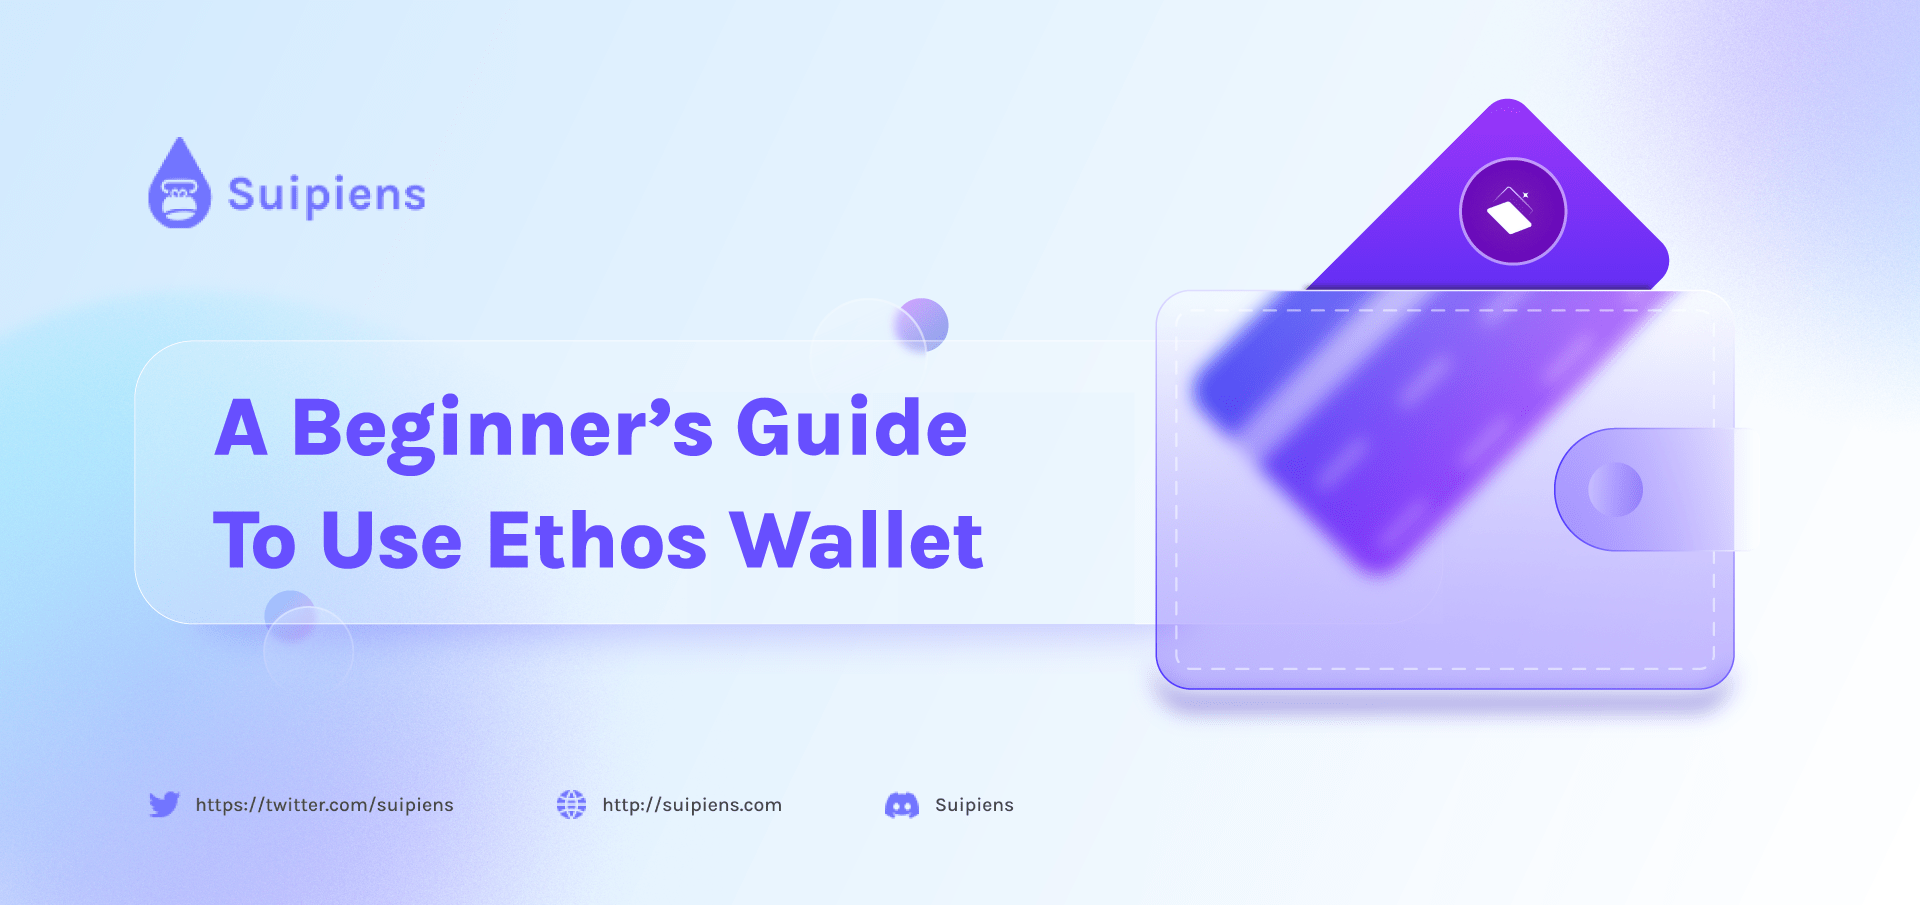 A Beginner’s Guide To Use Ethos Wallet